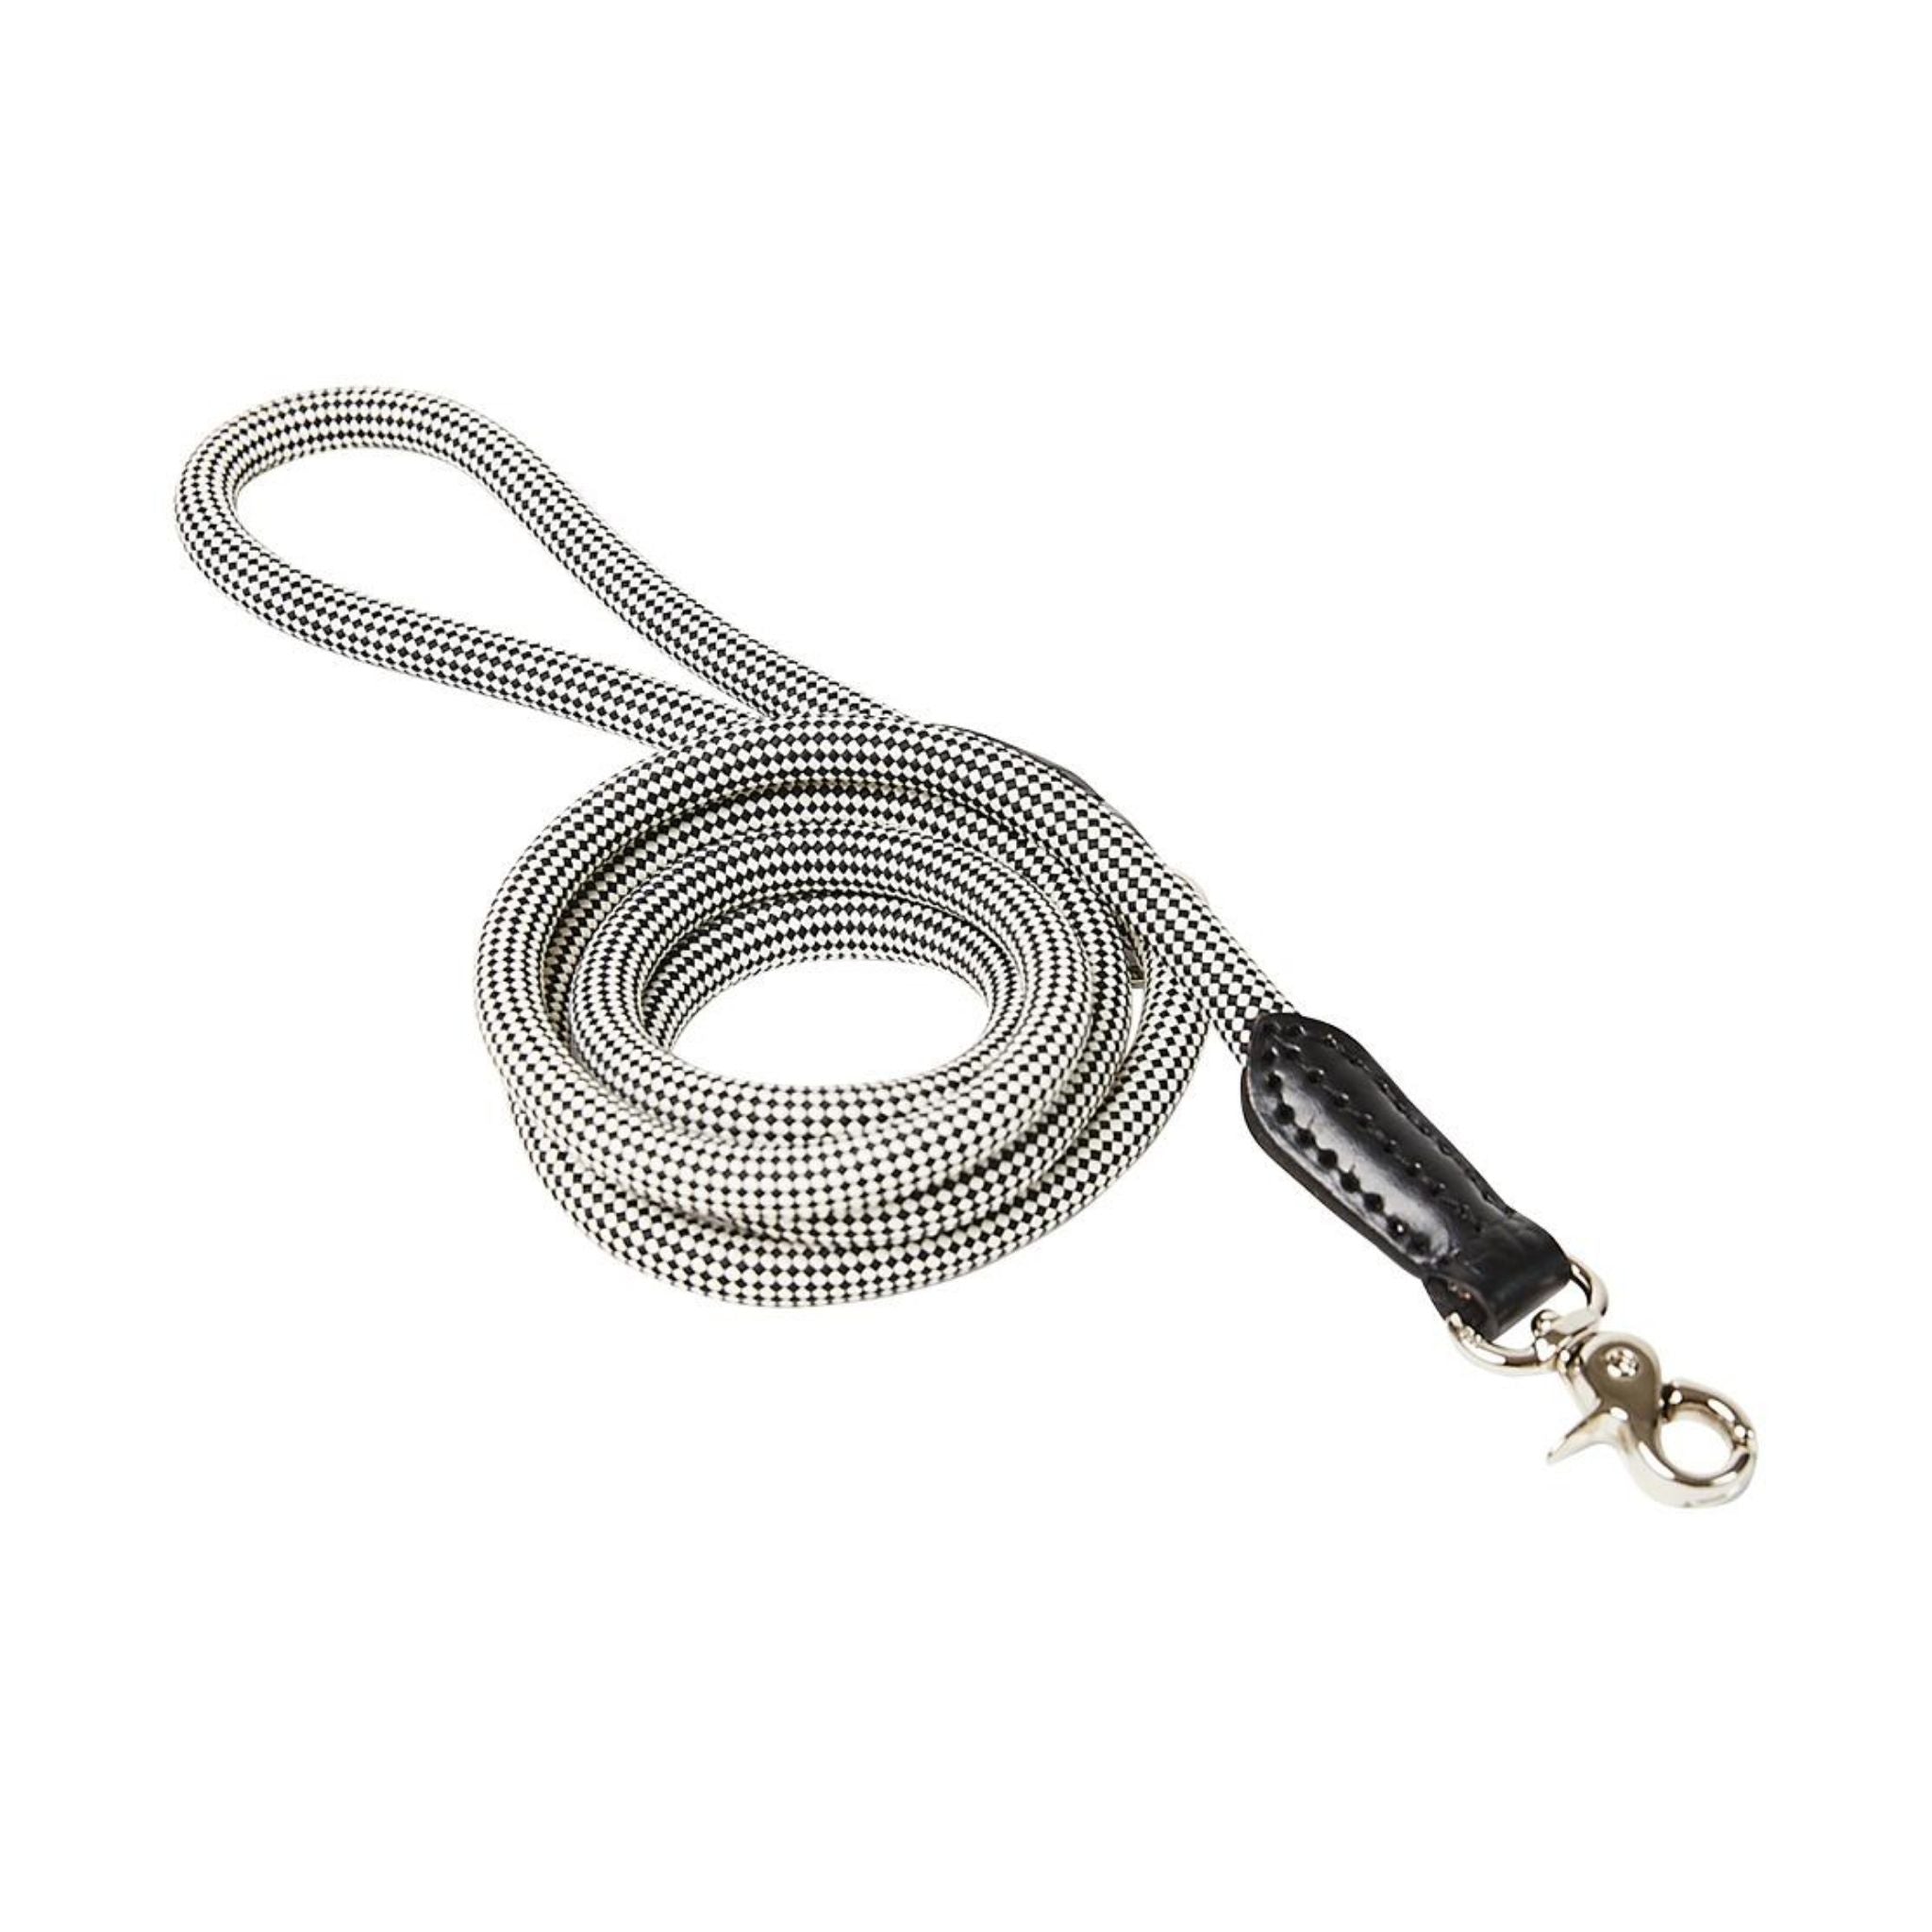 Check Rope Leash - Valley Variety